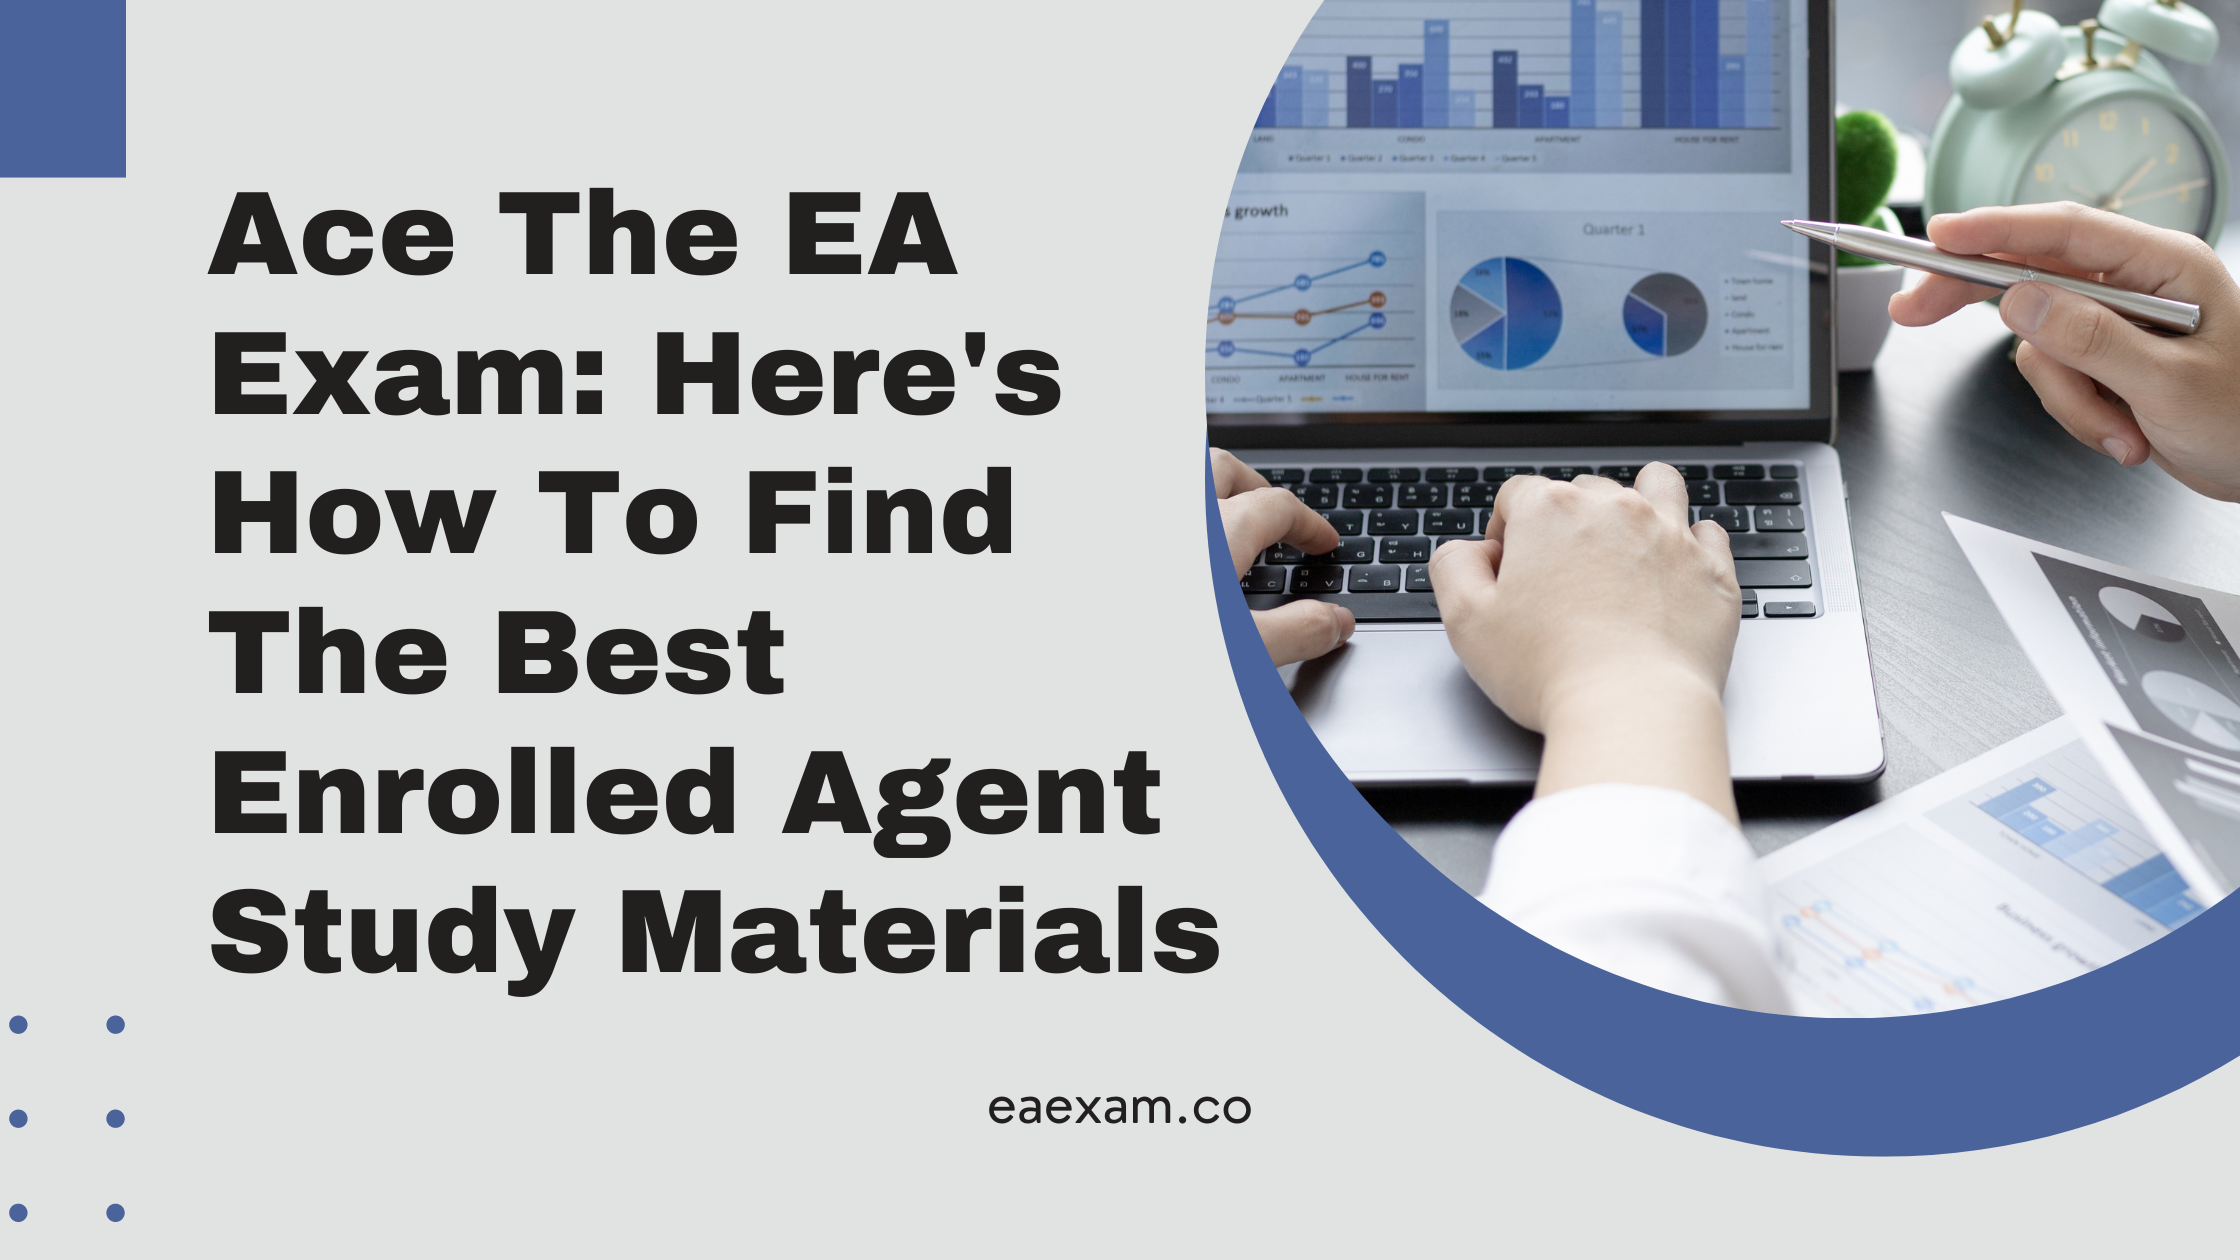 Ace The EA Exam Here's How To Find The Best Enrolled Agent Study Materials